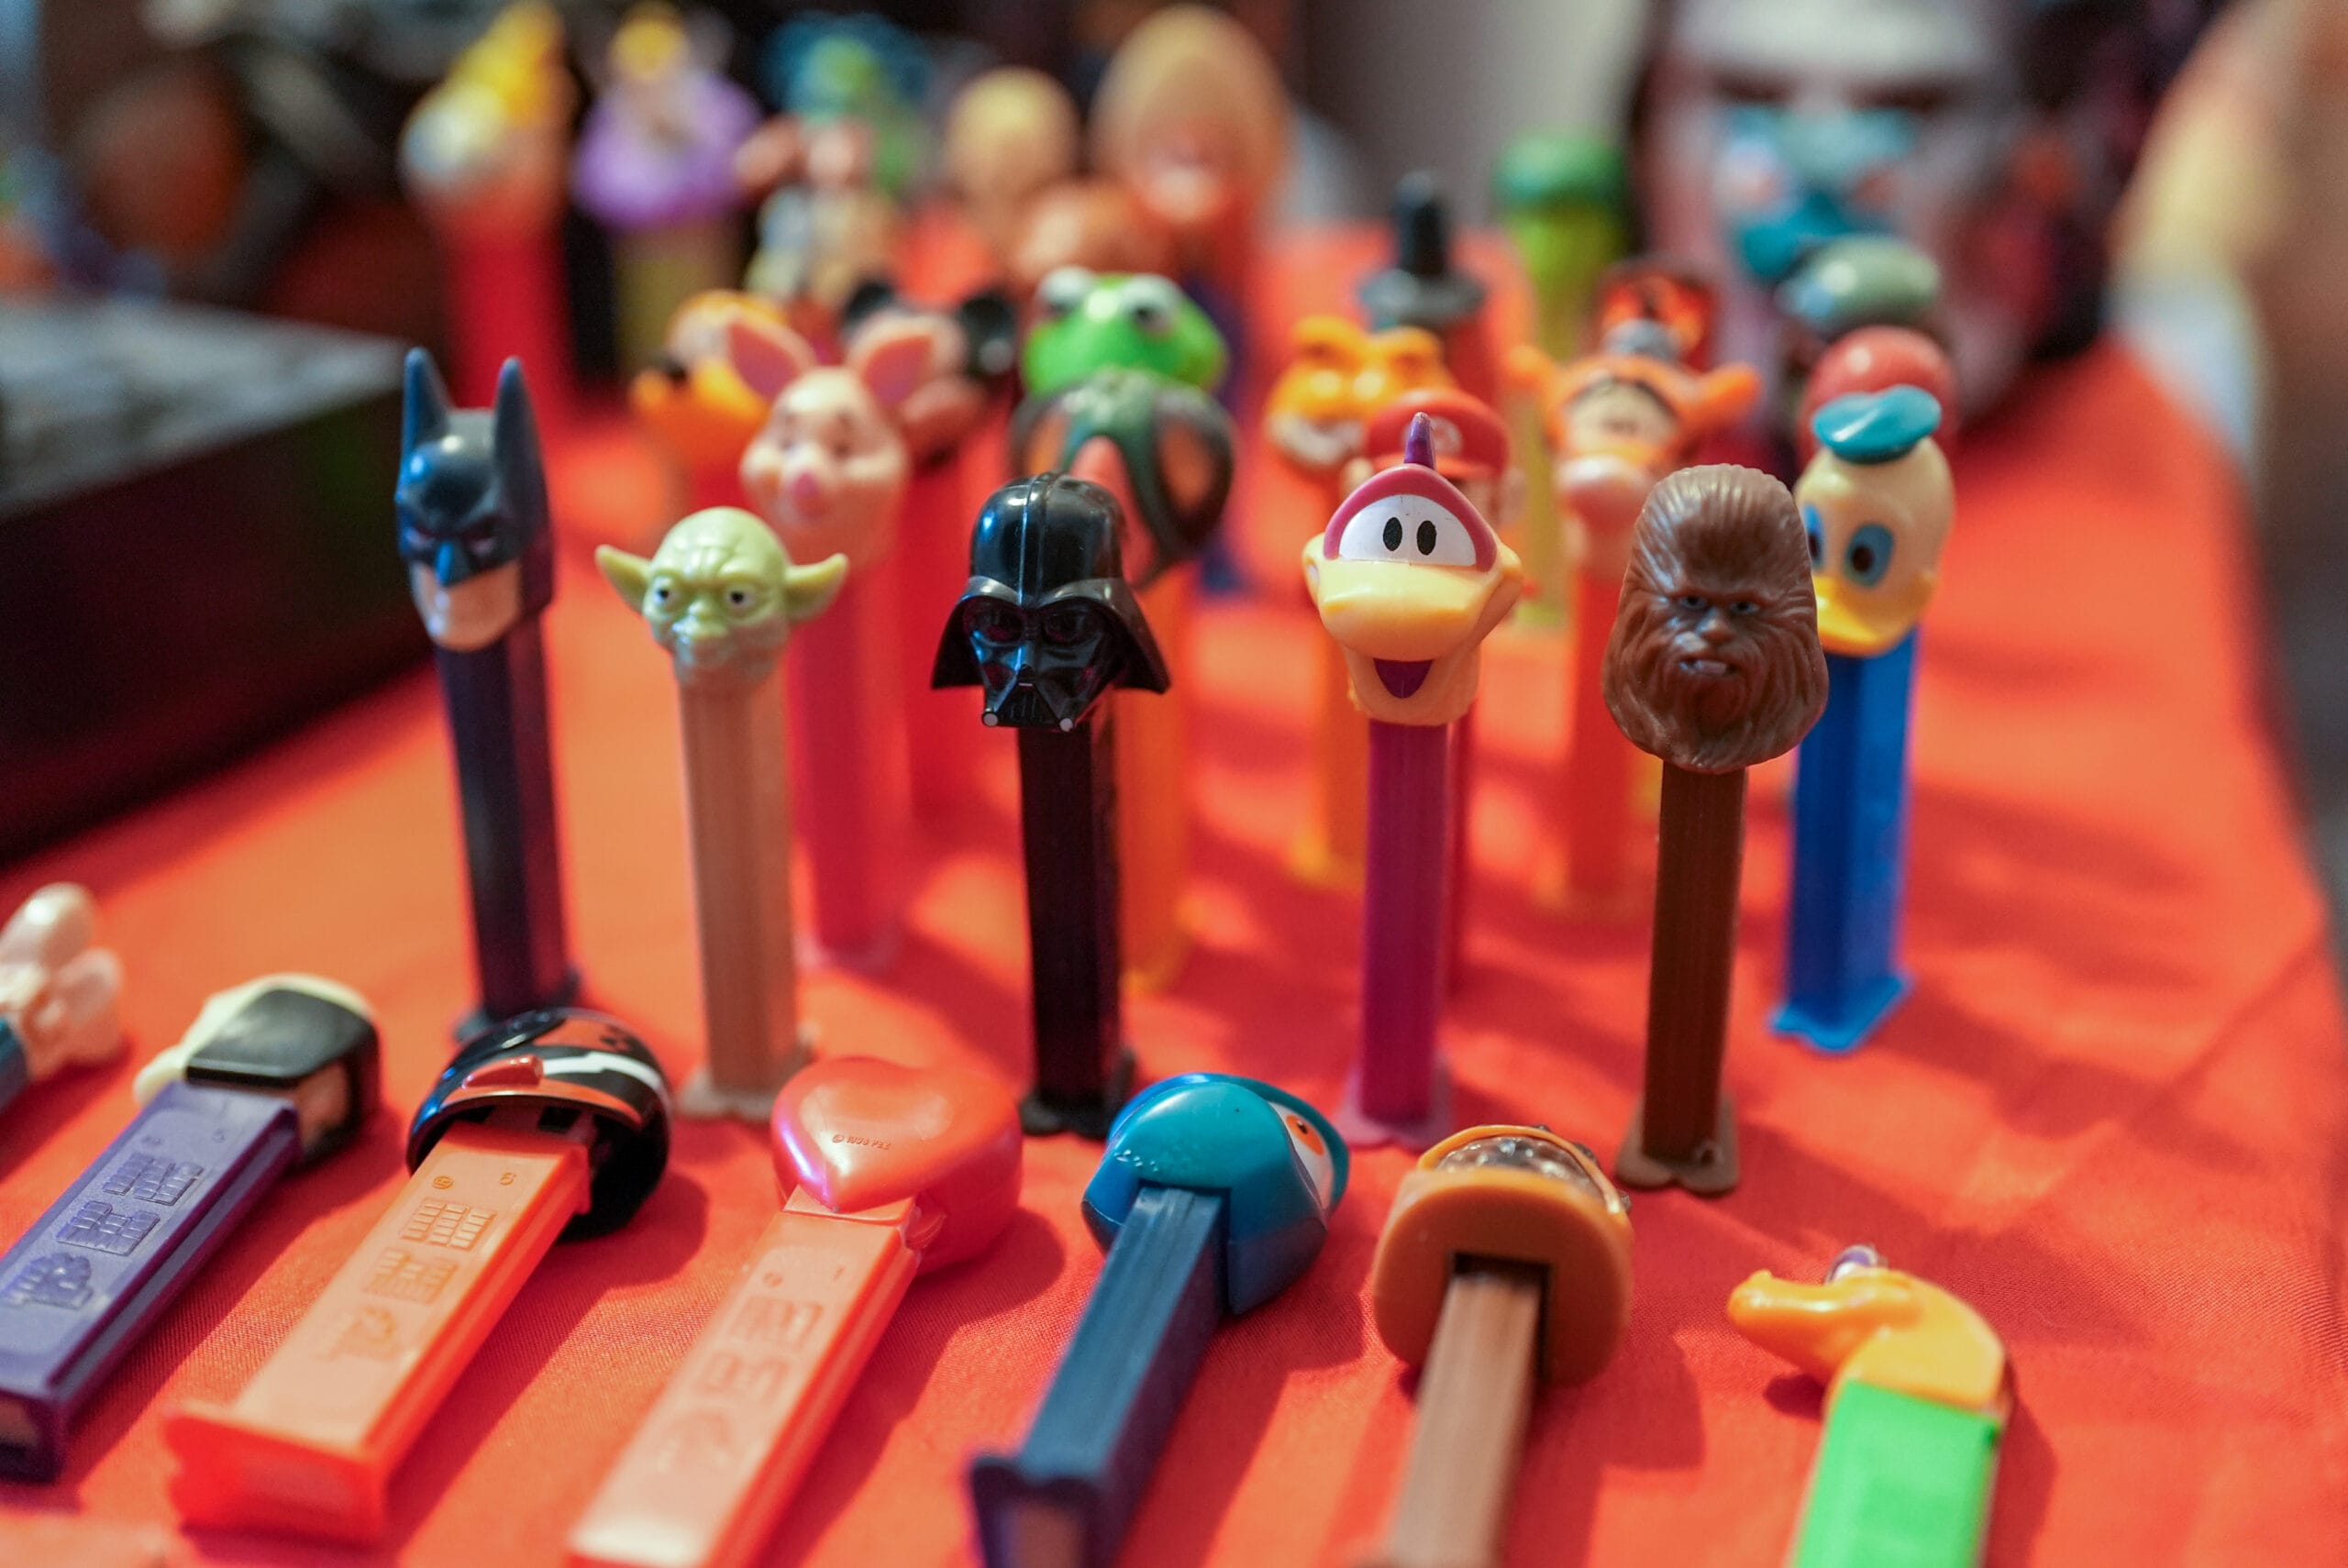 Pez containers on display at a Grasons estate sale.